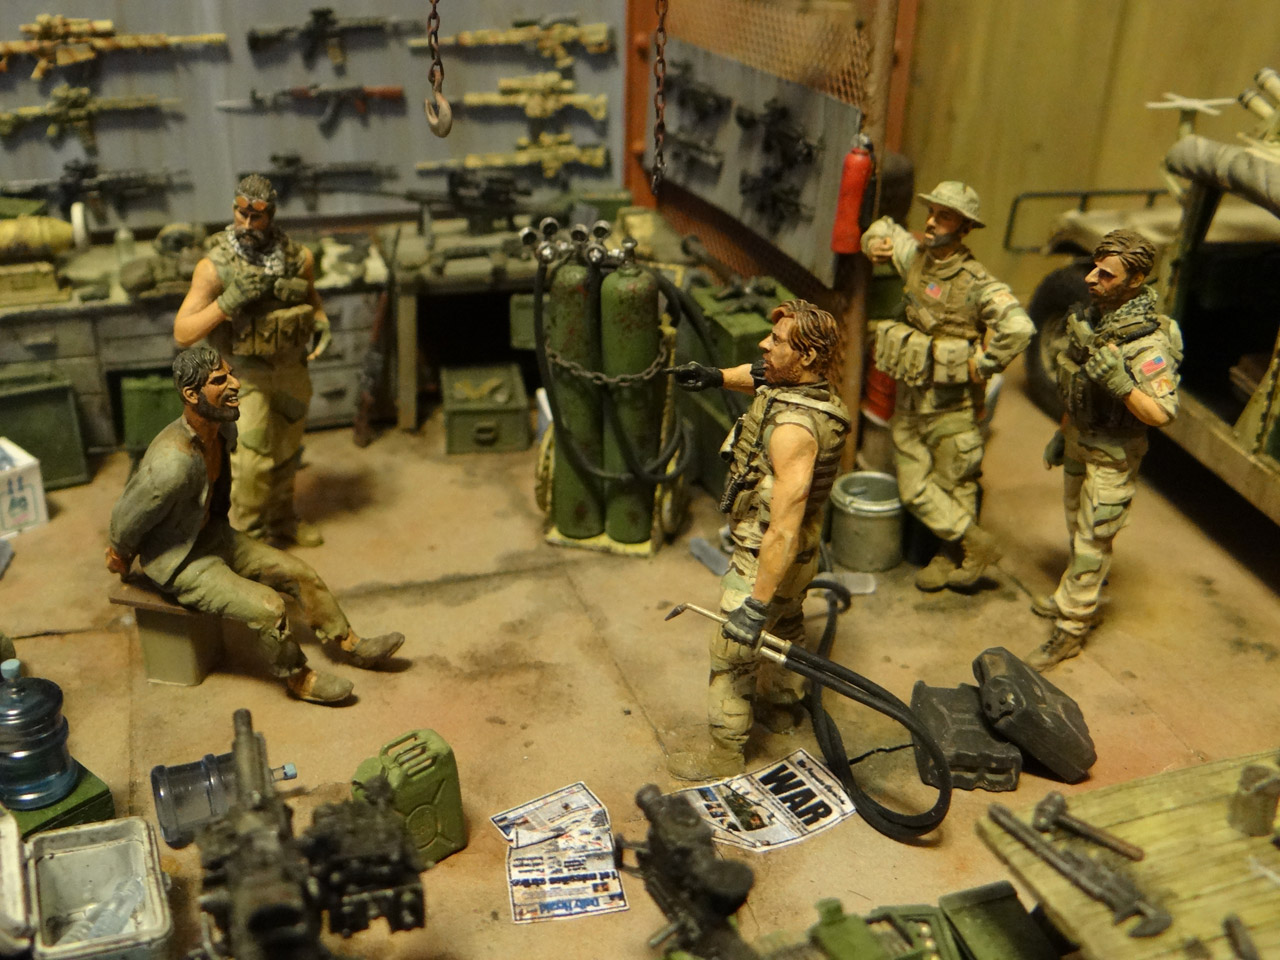 Dioramas and Vignettes: Enforcement to democracy, photo #5